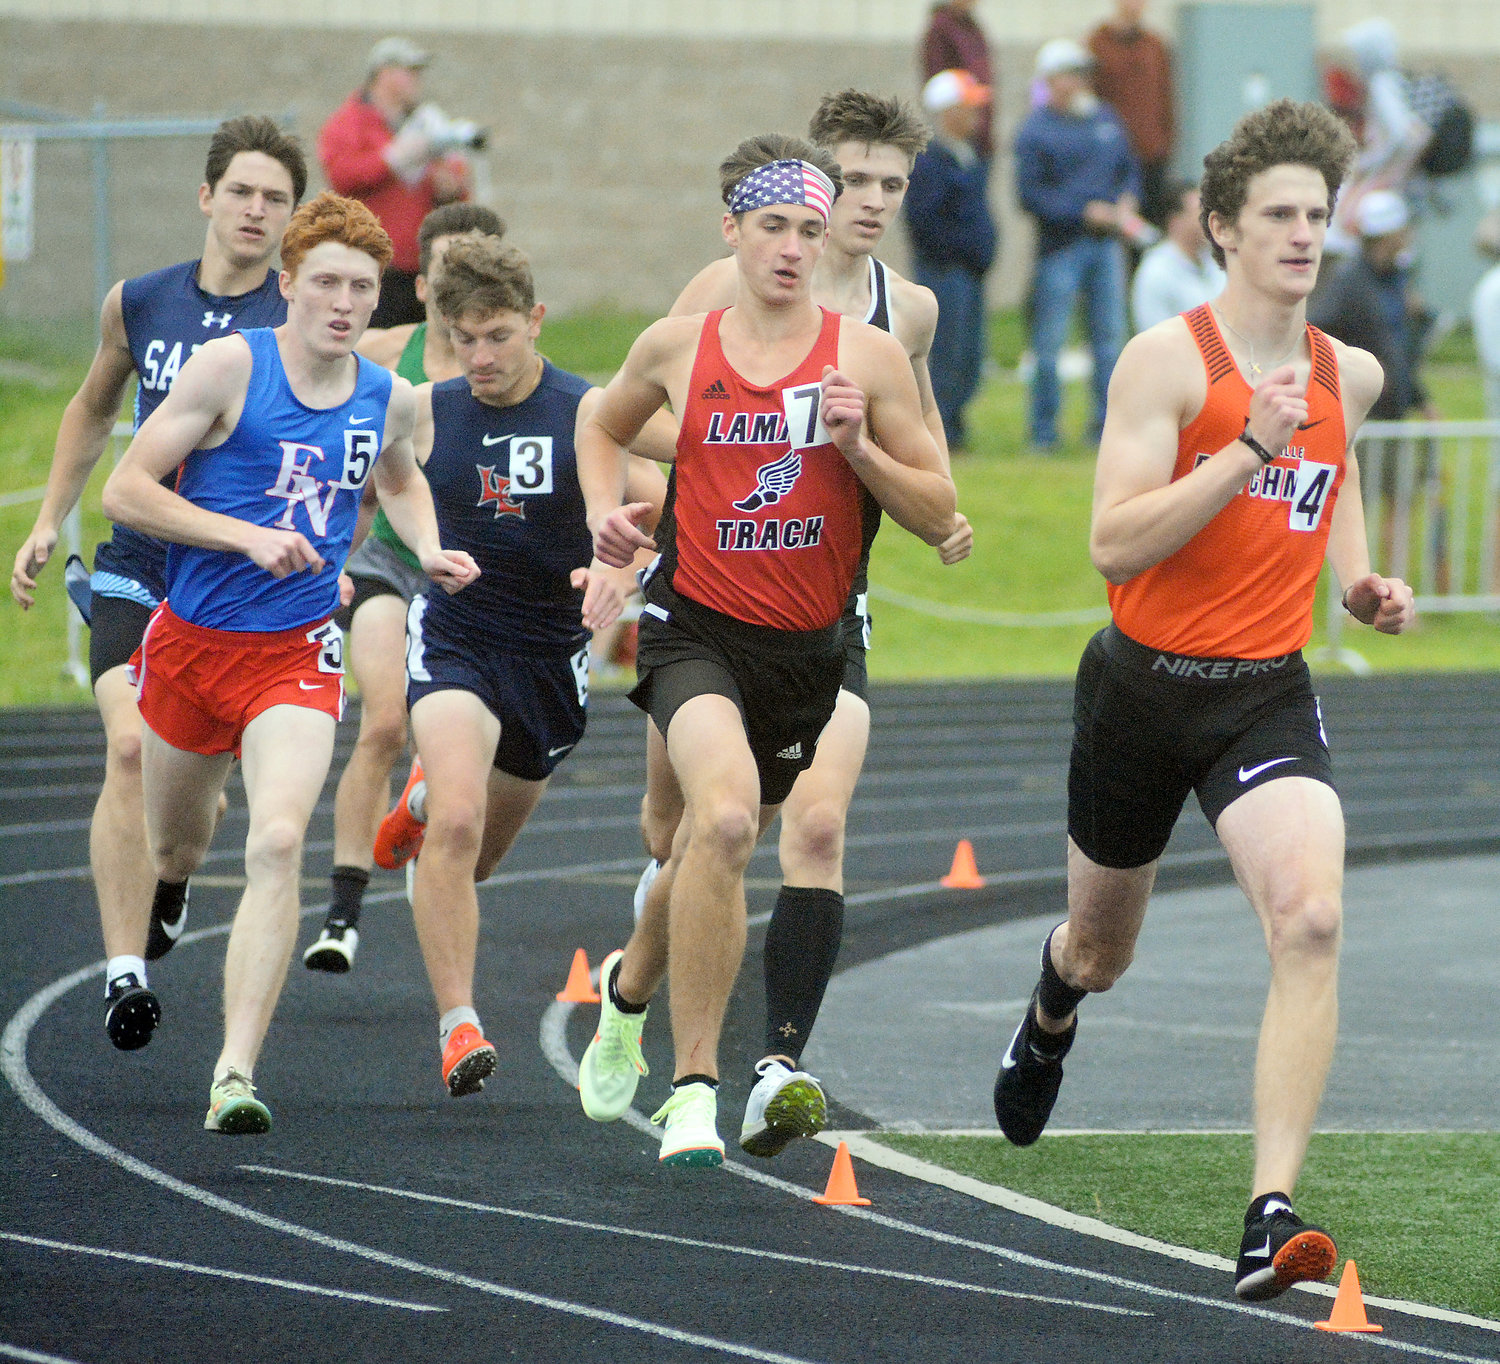 Gabe Soest (far right) leads the field after the first lap of the boys 800-meter run during one of four Missouri State High School Activities Association (MSHSAA) Class 3 sectional track meets held Saturday at Hollister High School. Soest went on to place third in the event to qualify for state this weekend in Jefferson City.